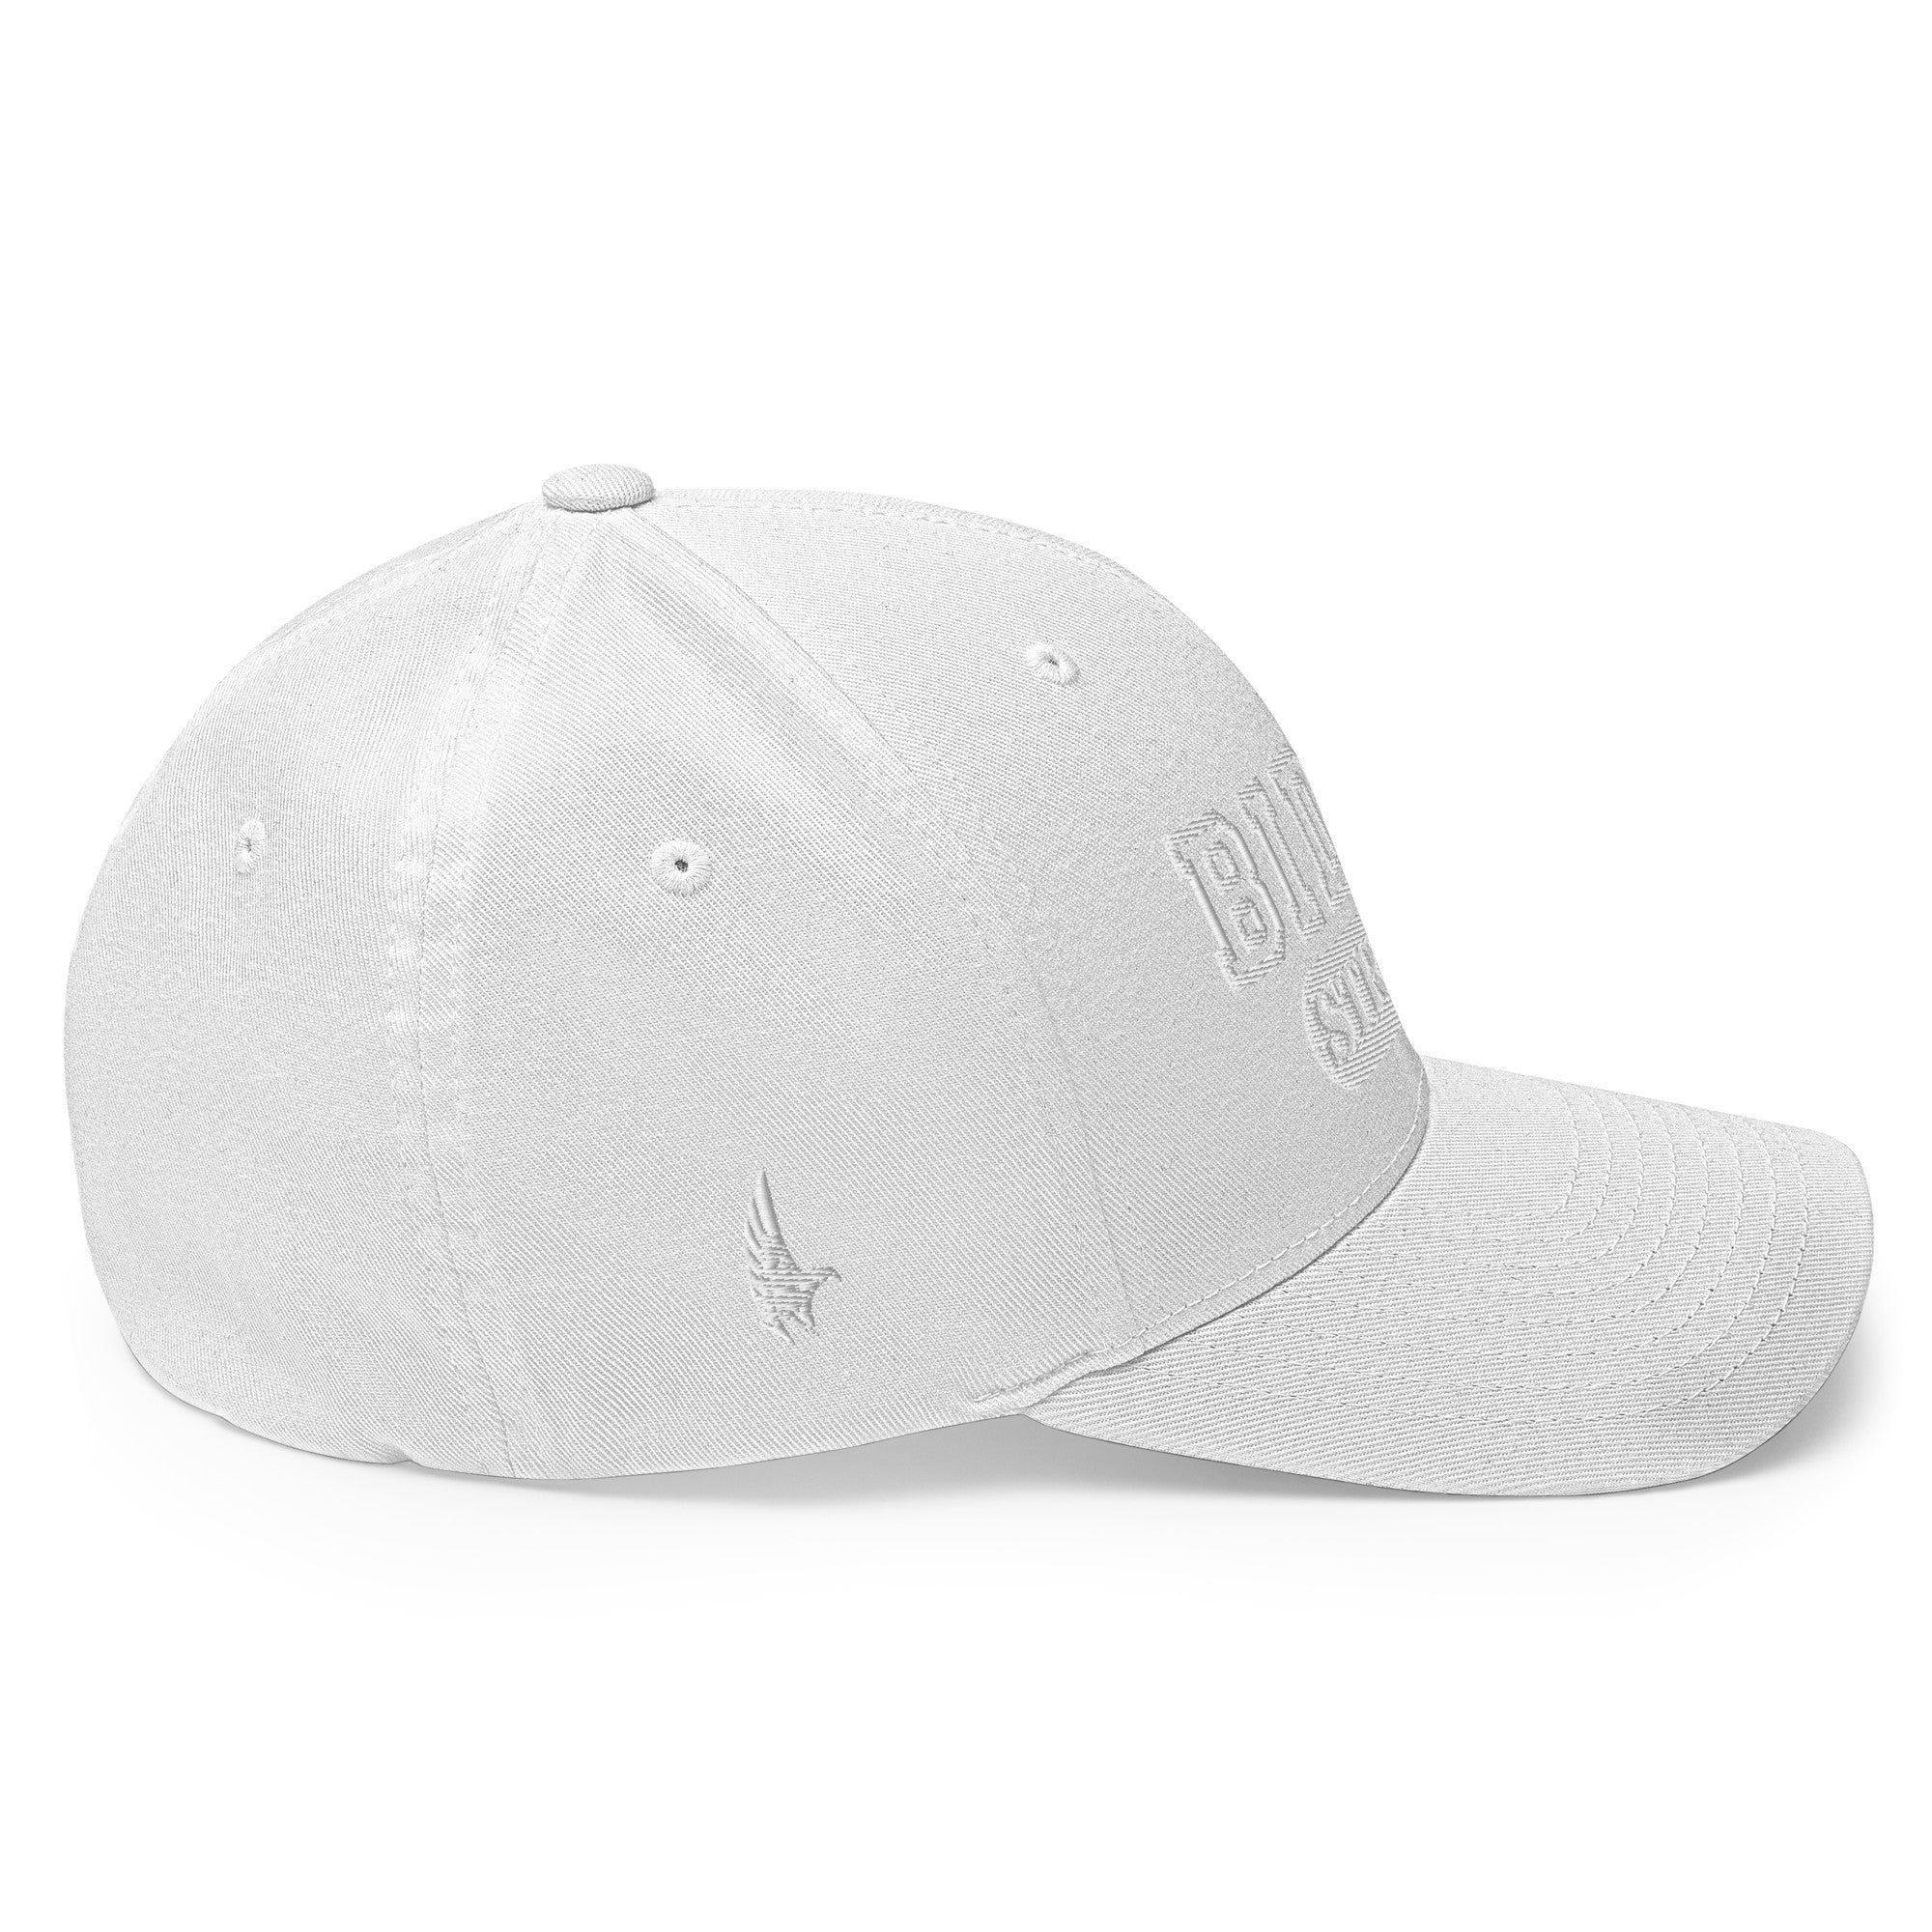 Biden Strong Fitted Hat - Loyalty Vibes